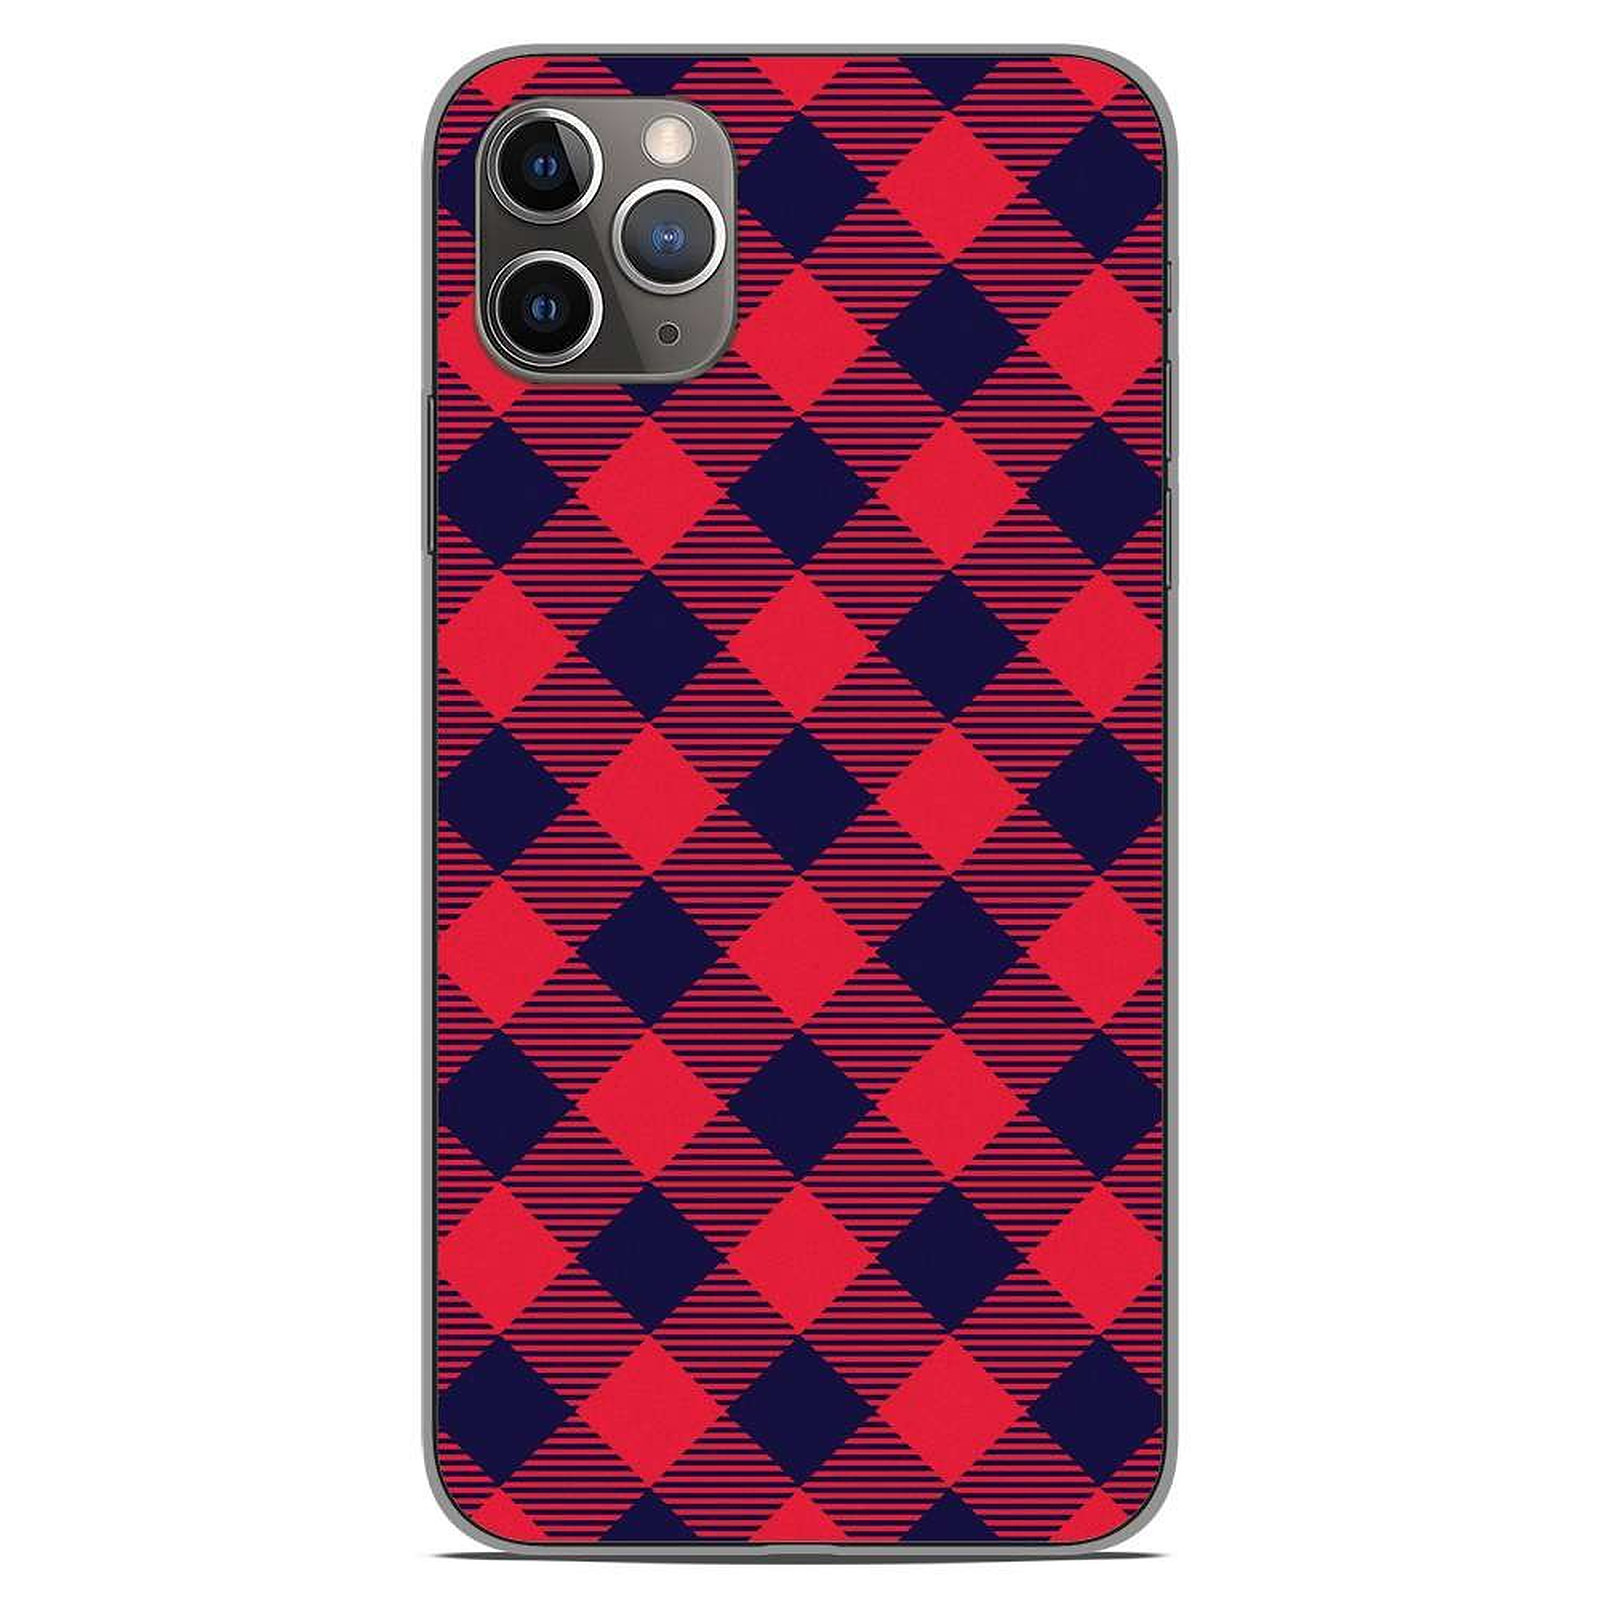 1001 Coques Coque silicone gel Apple iPhone 11 Pro Max motif Tartan Rouge - Coque telephone 1001Coques